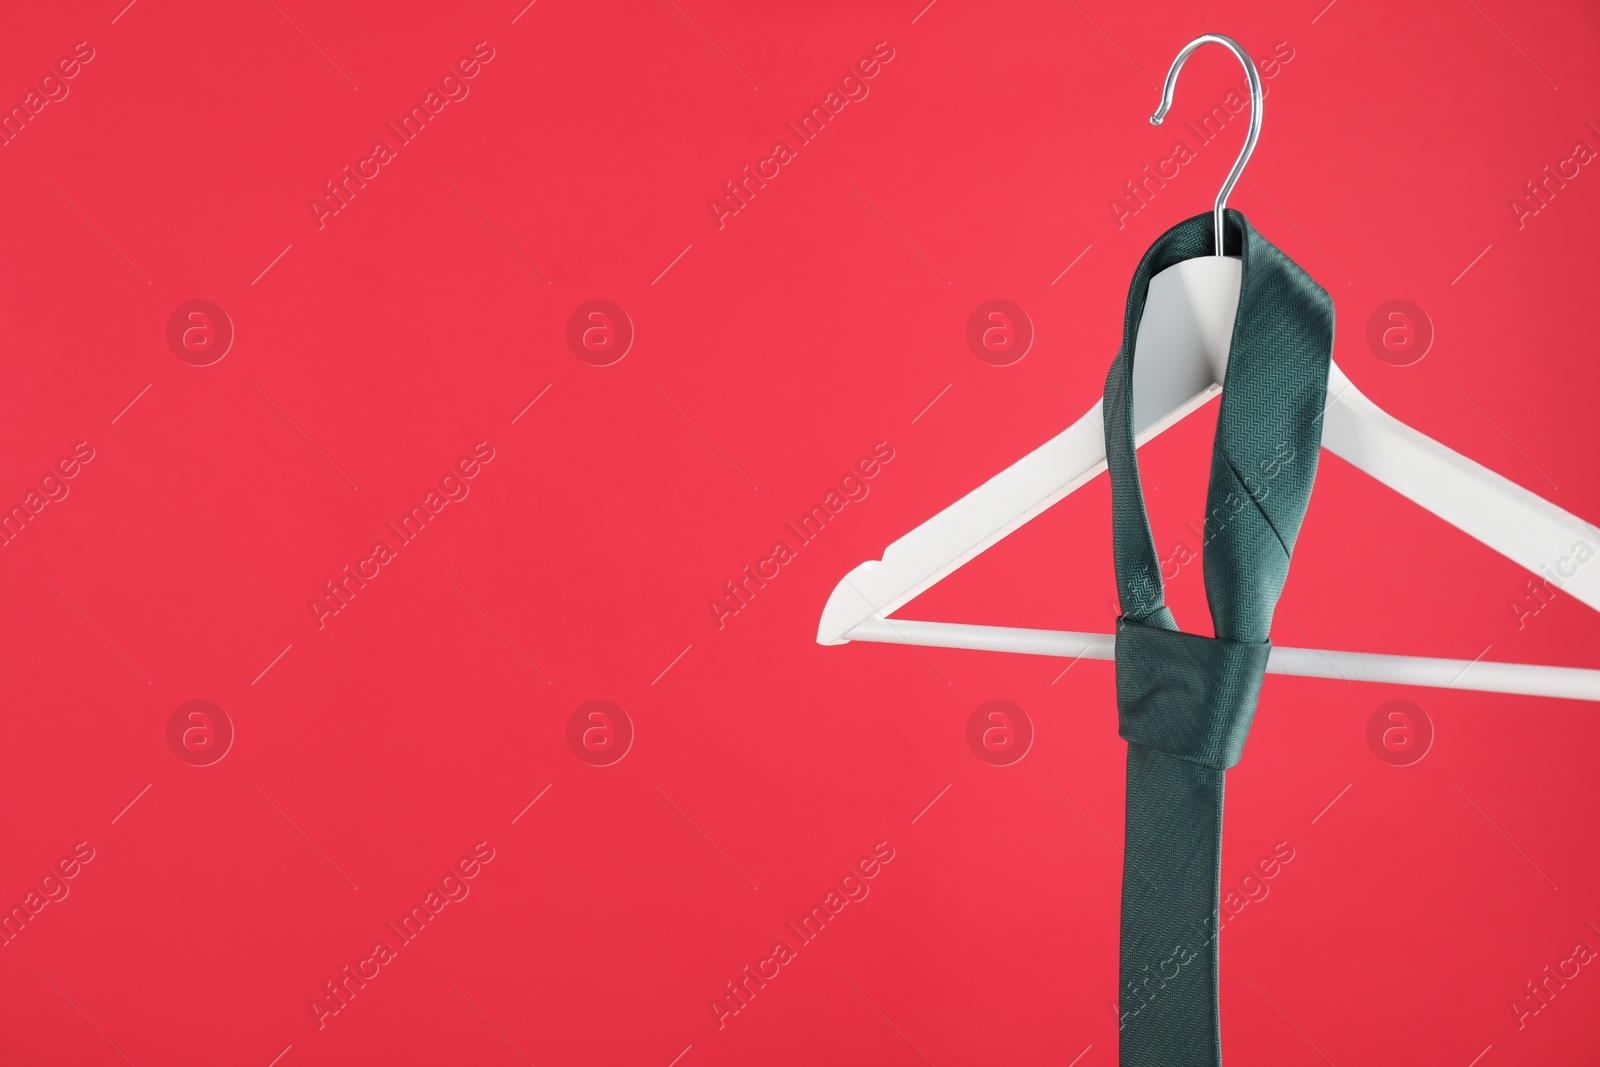 Photo of Hanger with teal tie on red background. Space for text